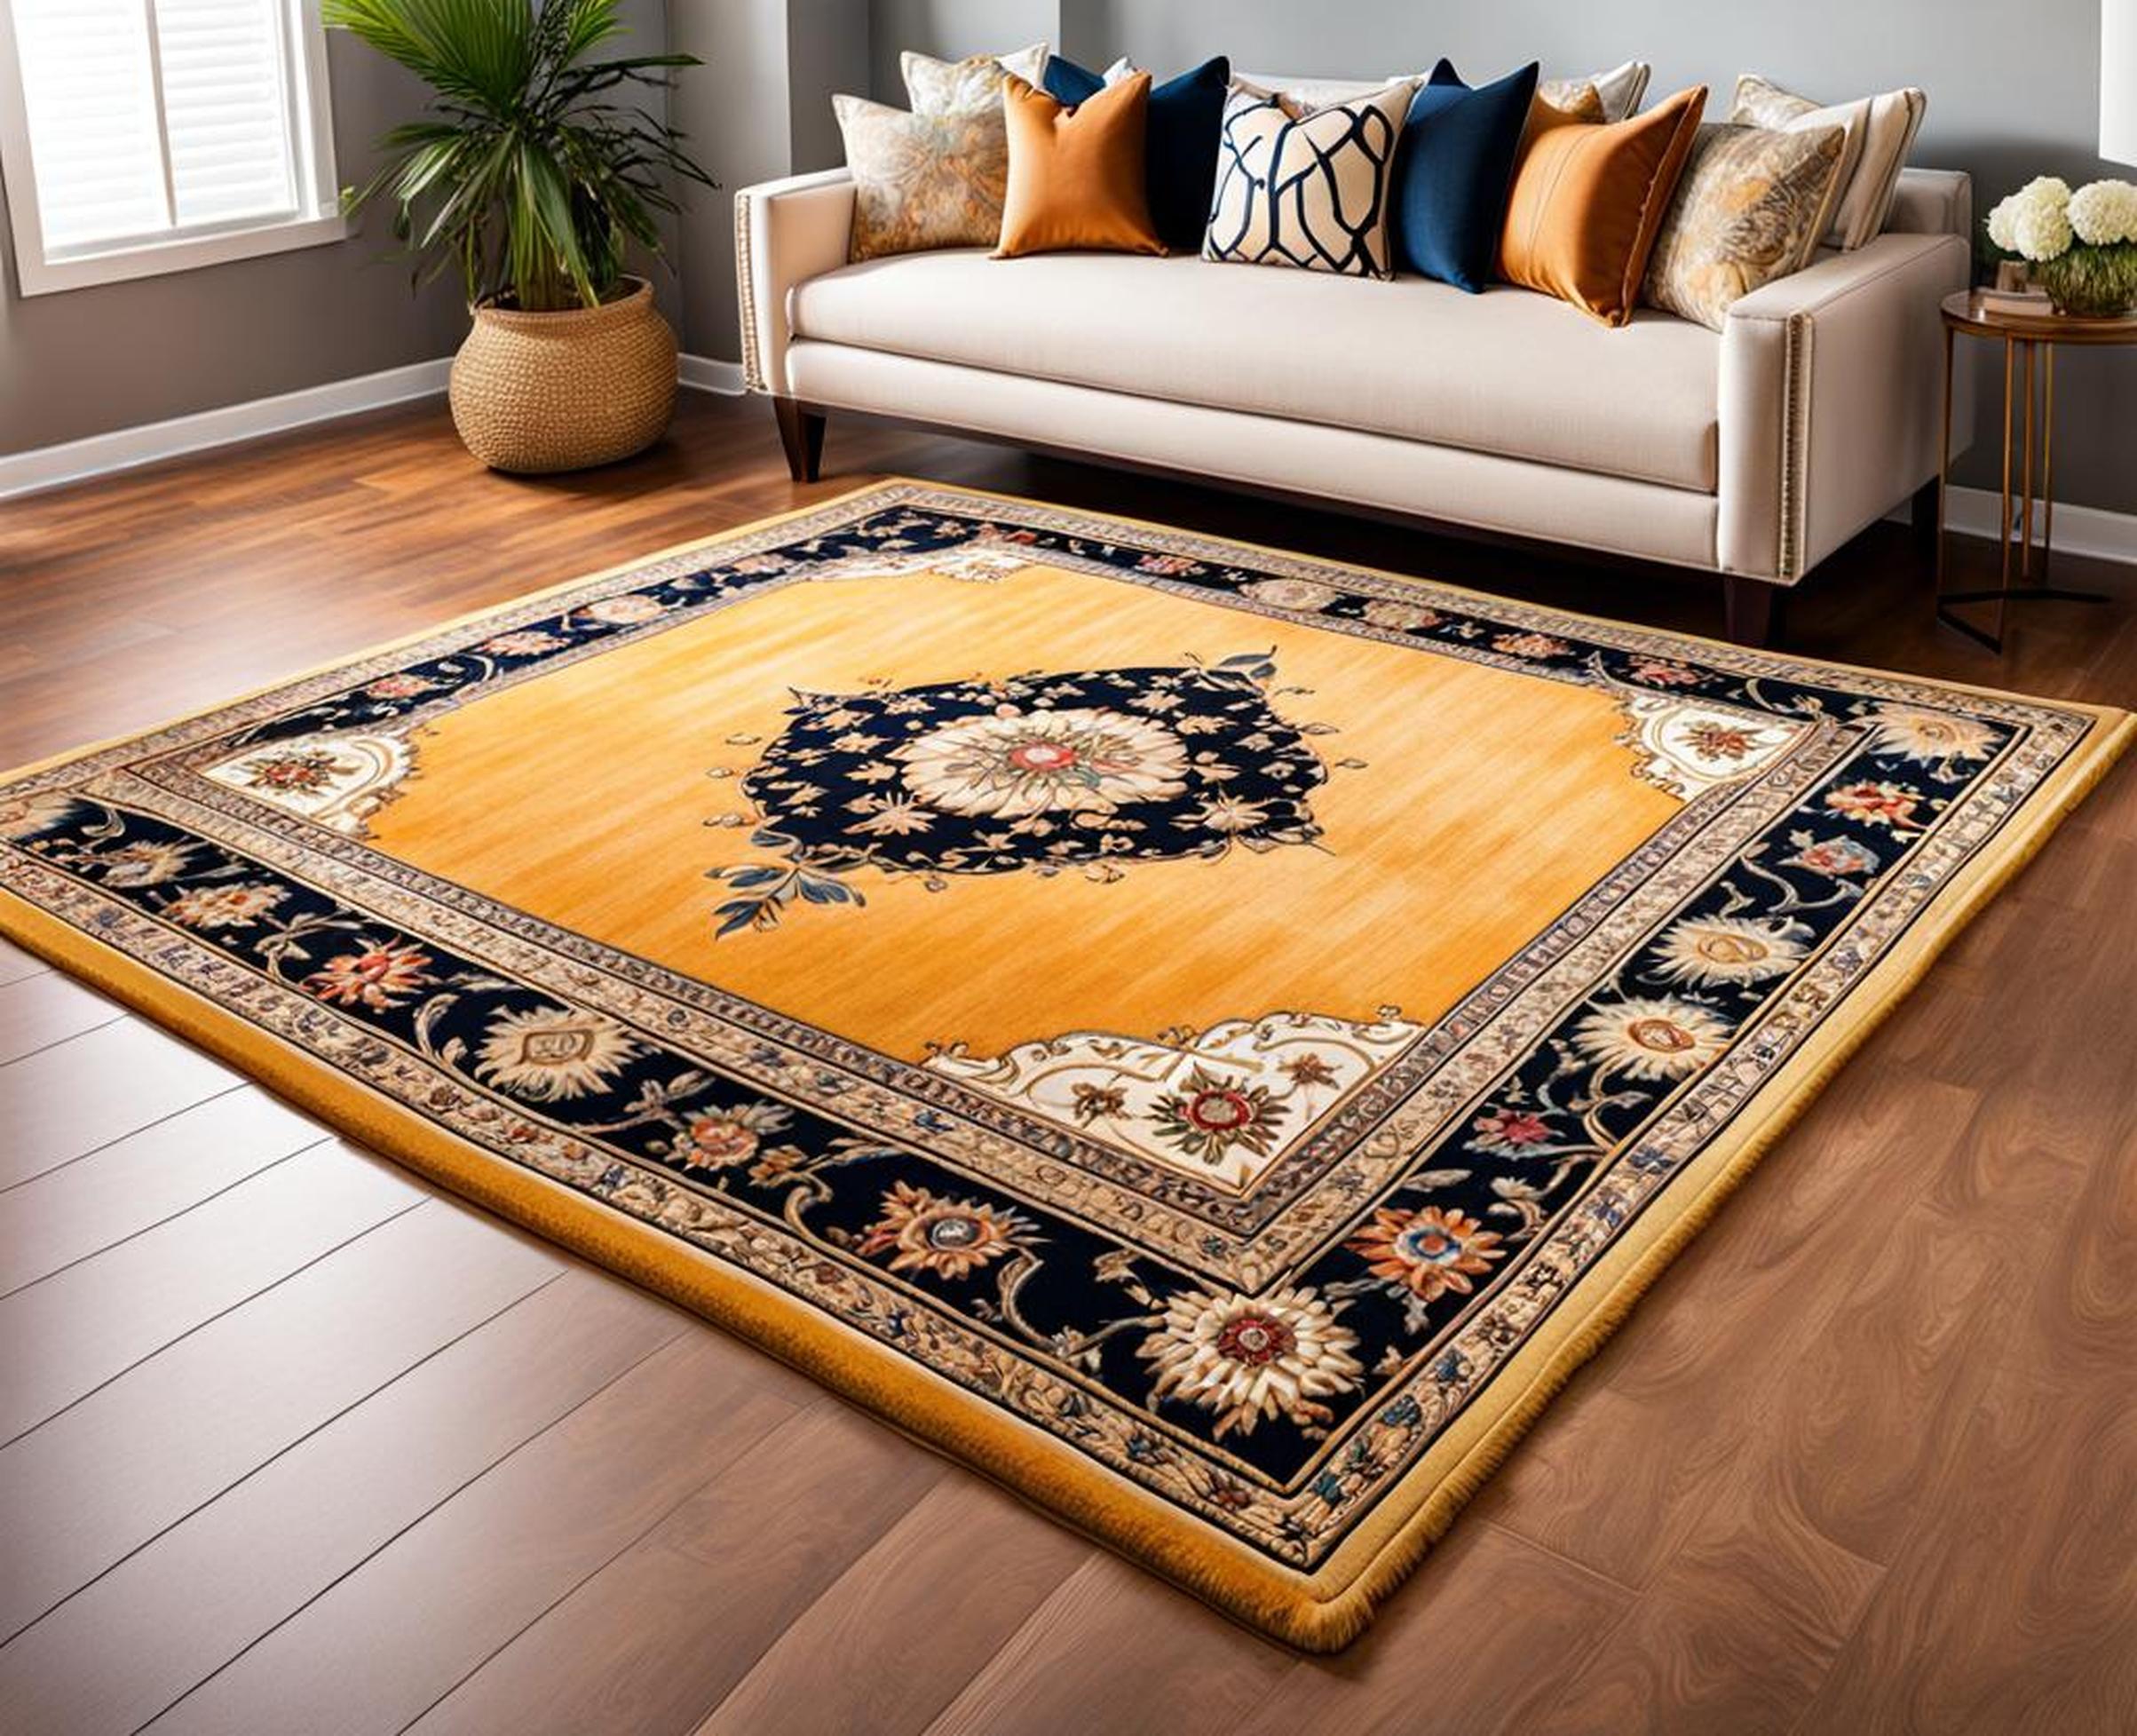 queen bed rug size guide